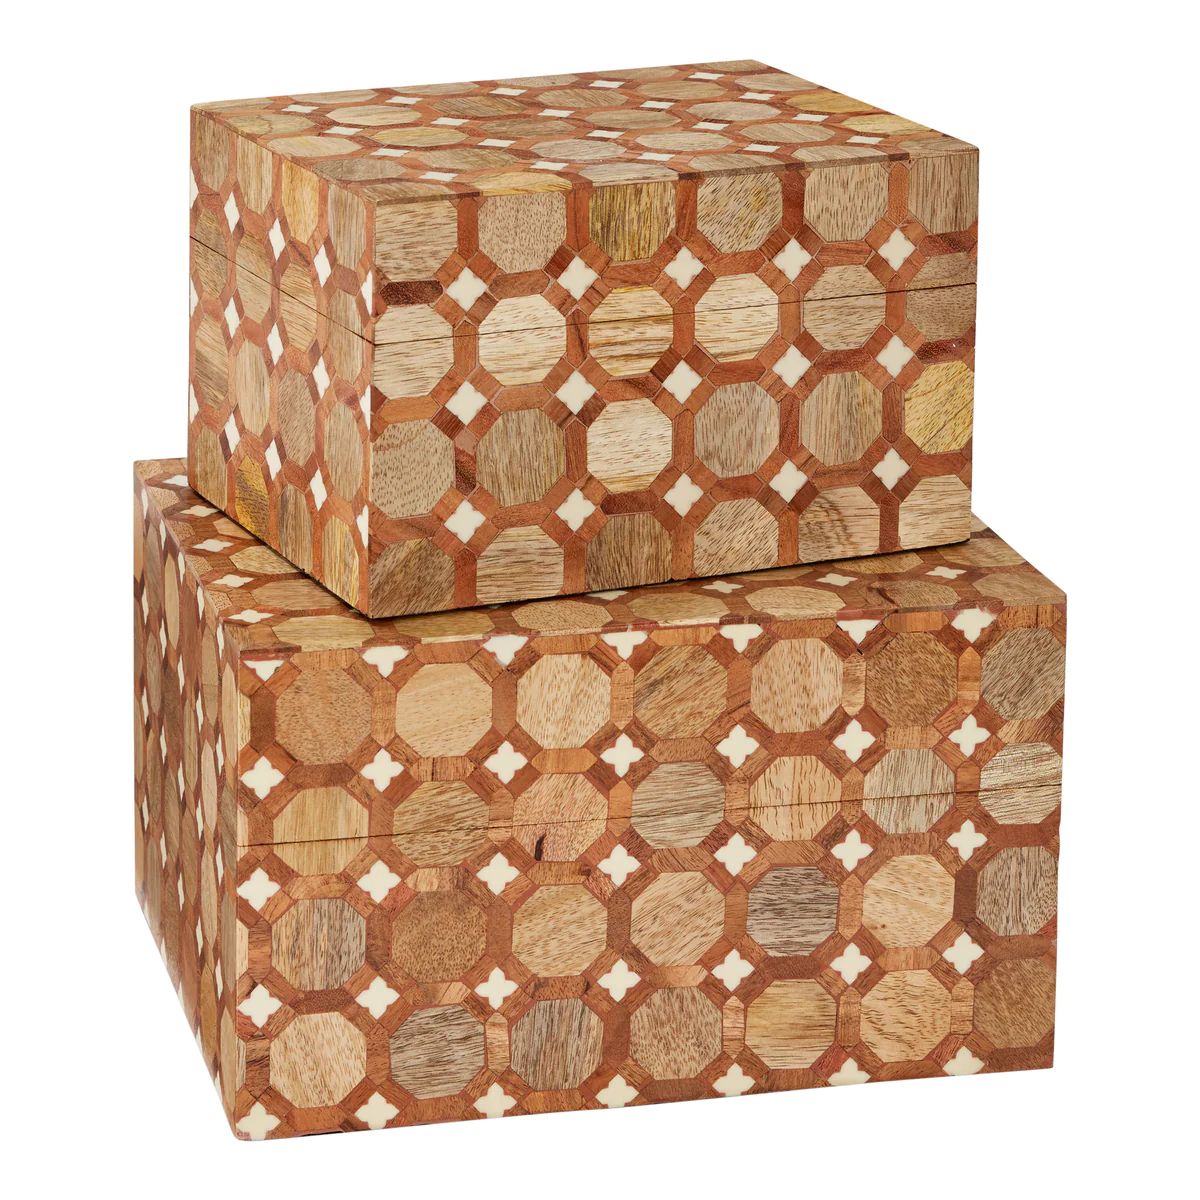 Sorrento Parquetry Boxes, Set of 2 | Amanda Lindroth